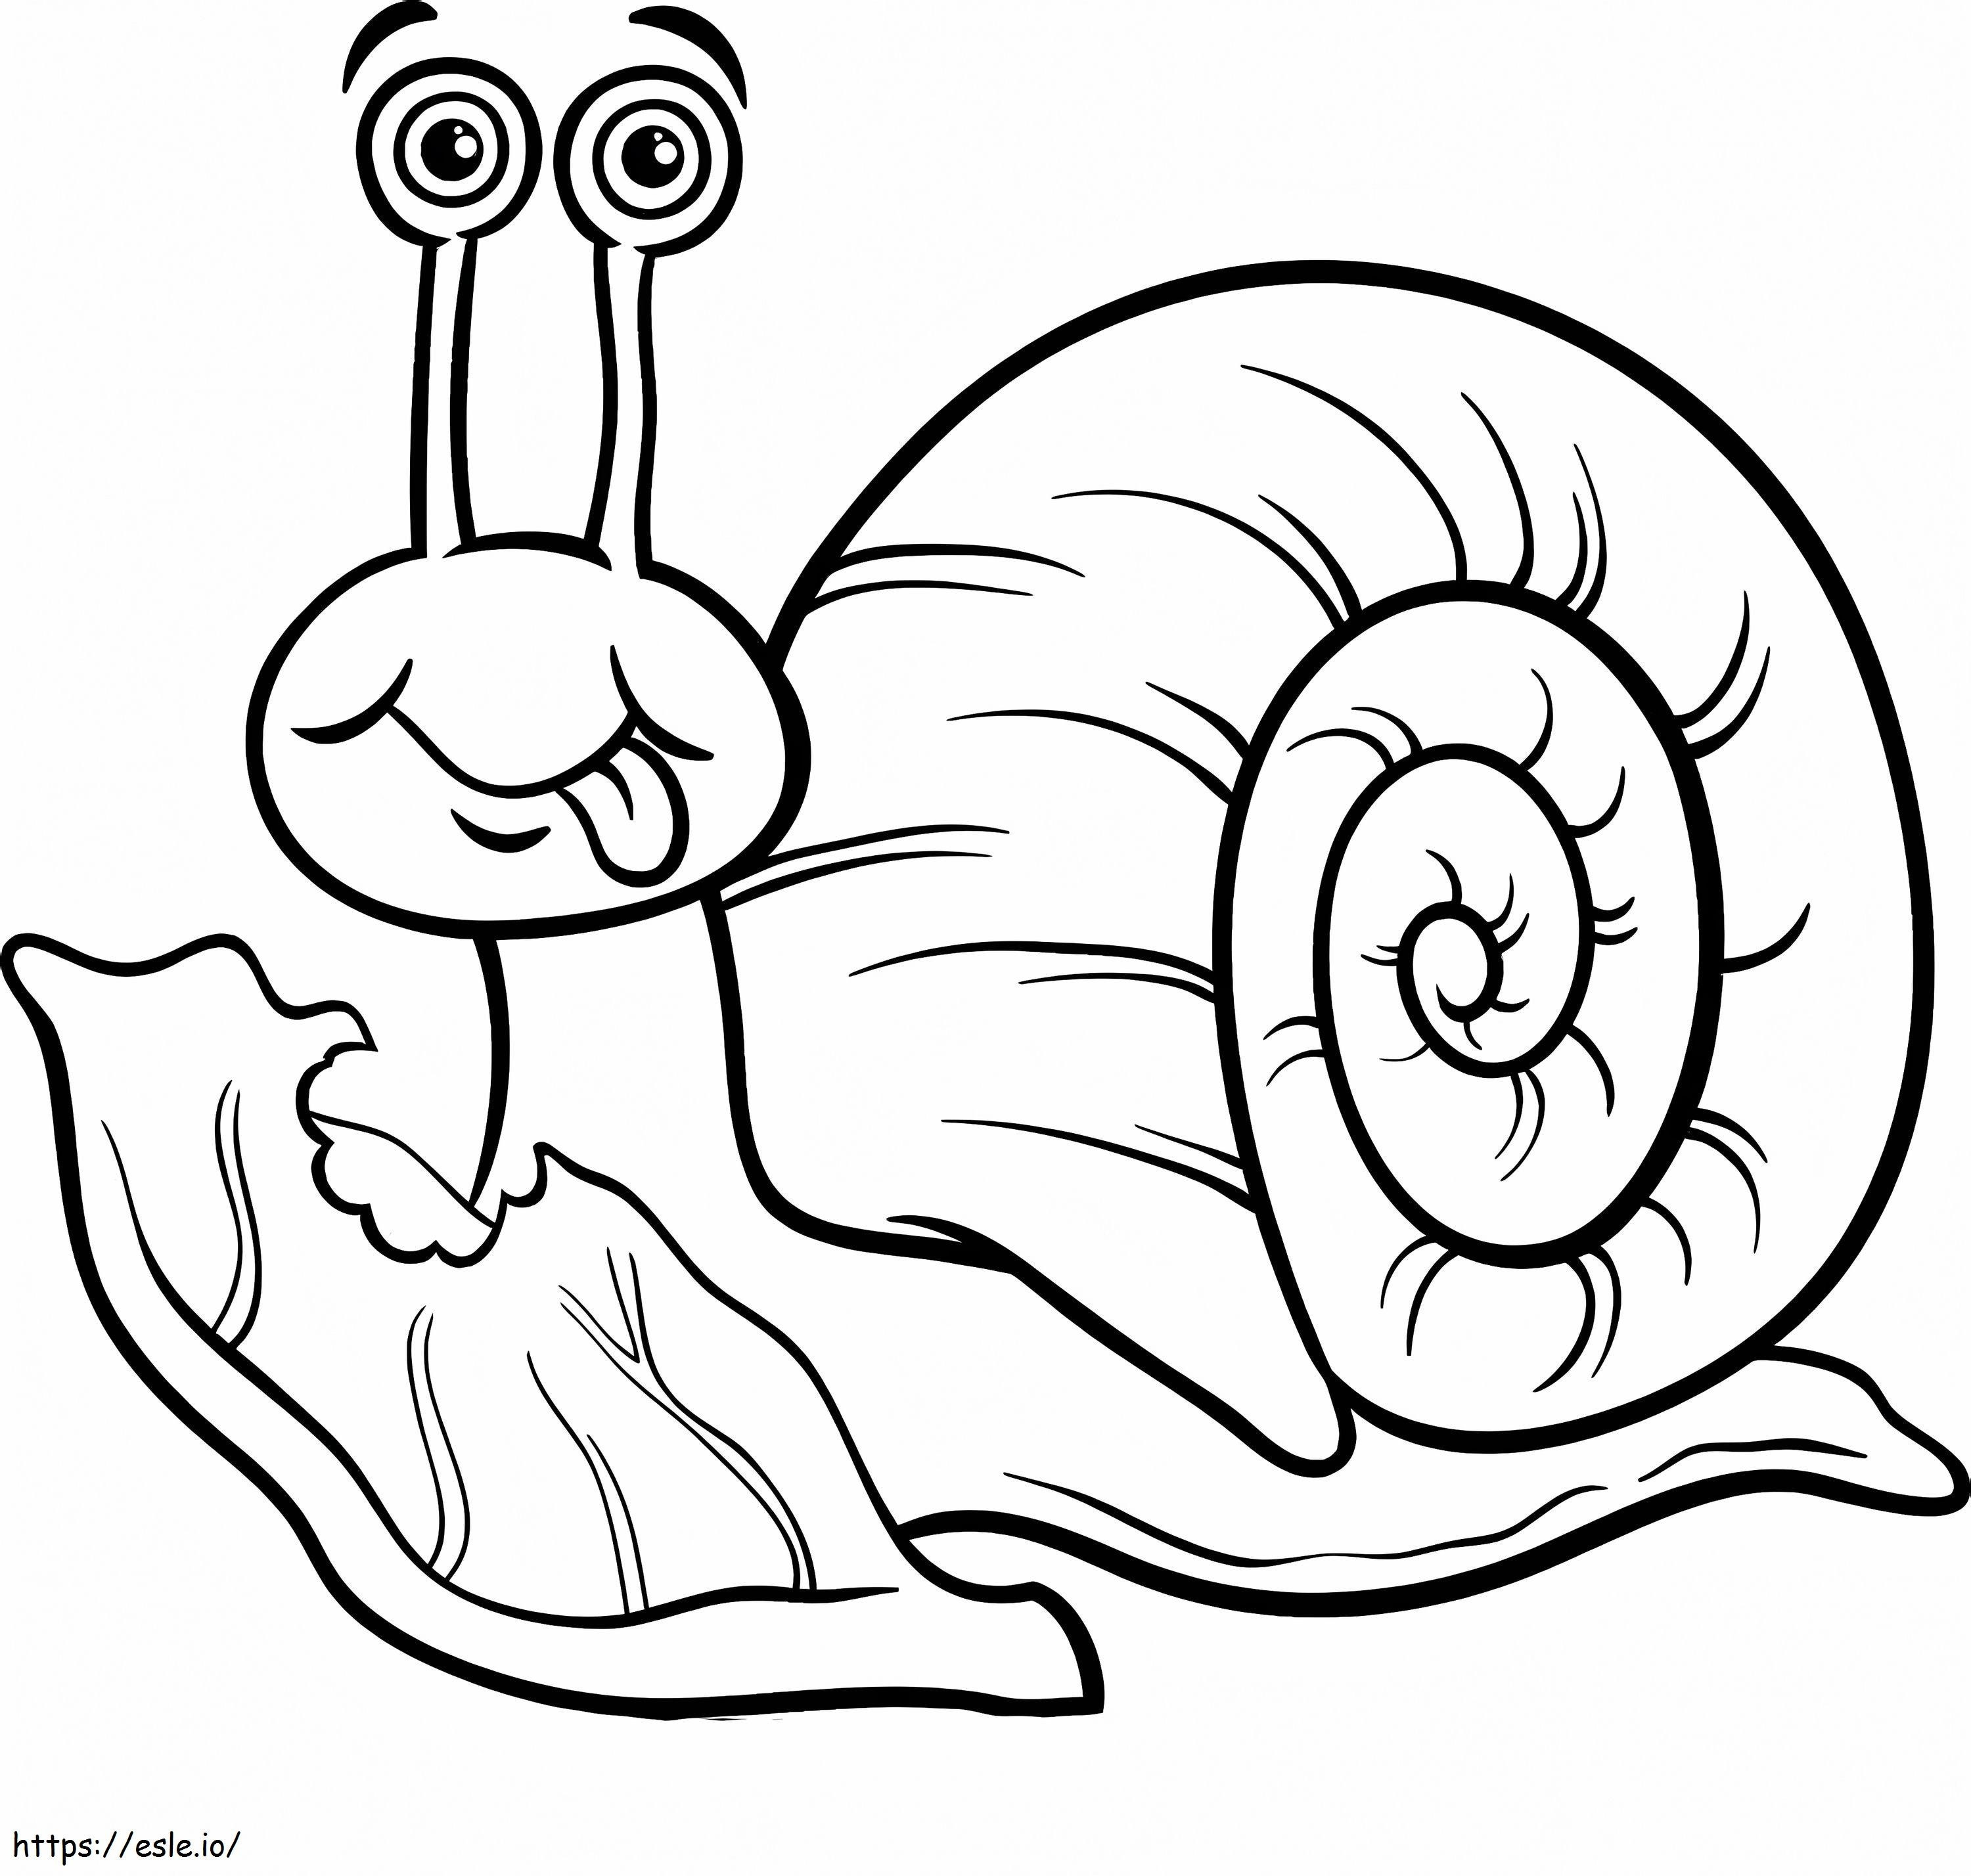 Snail Eating Leaf coloring page